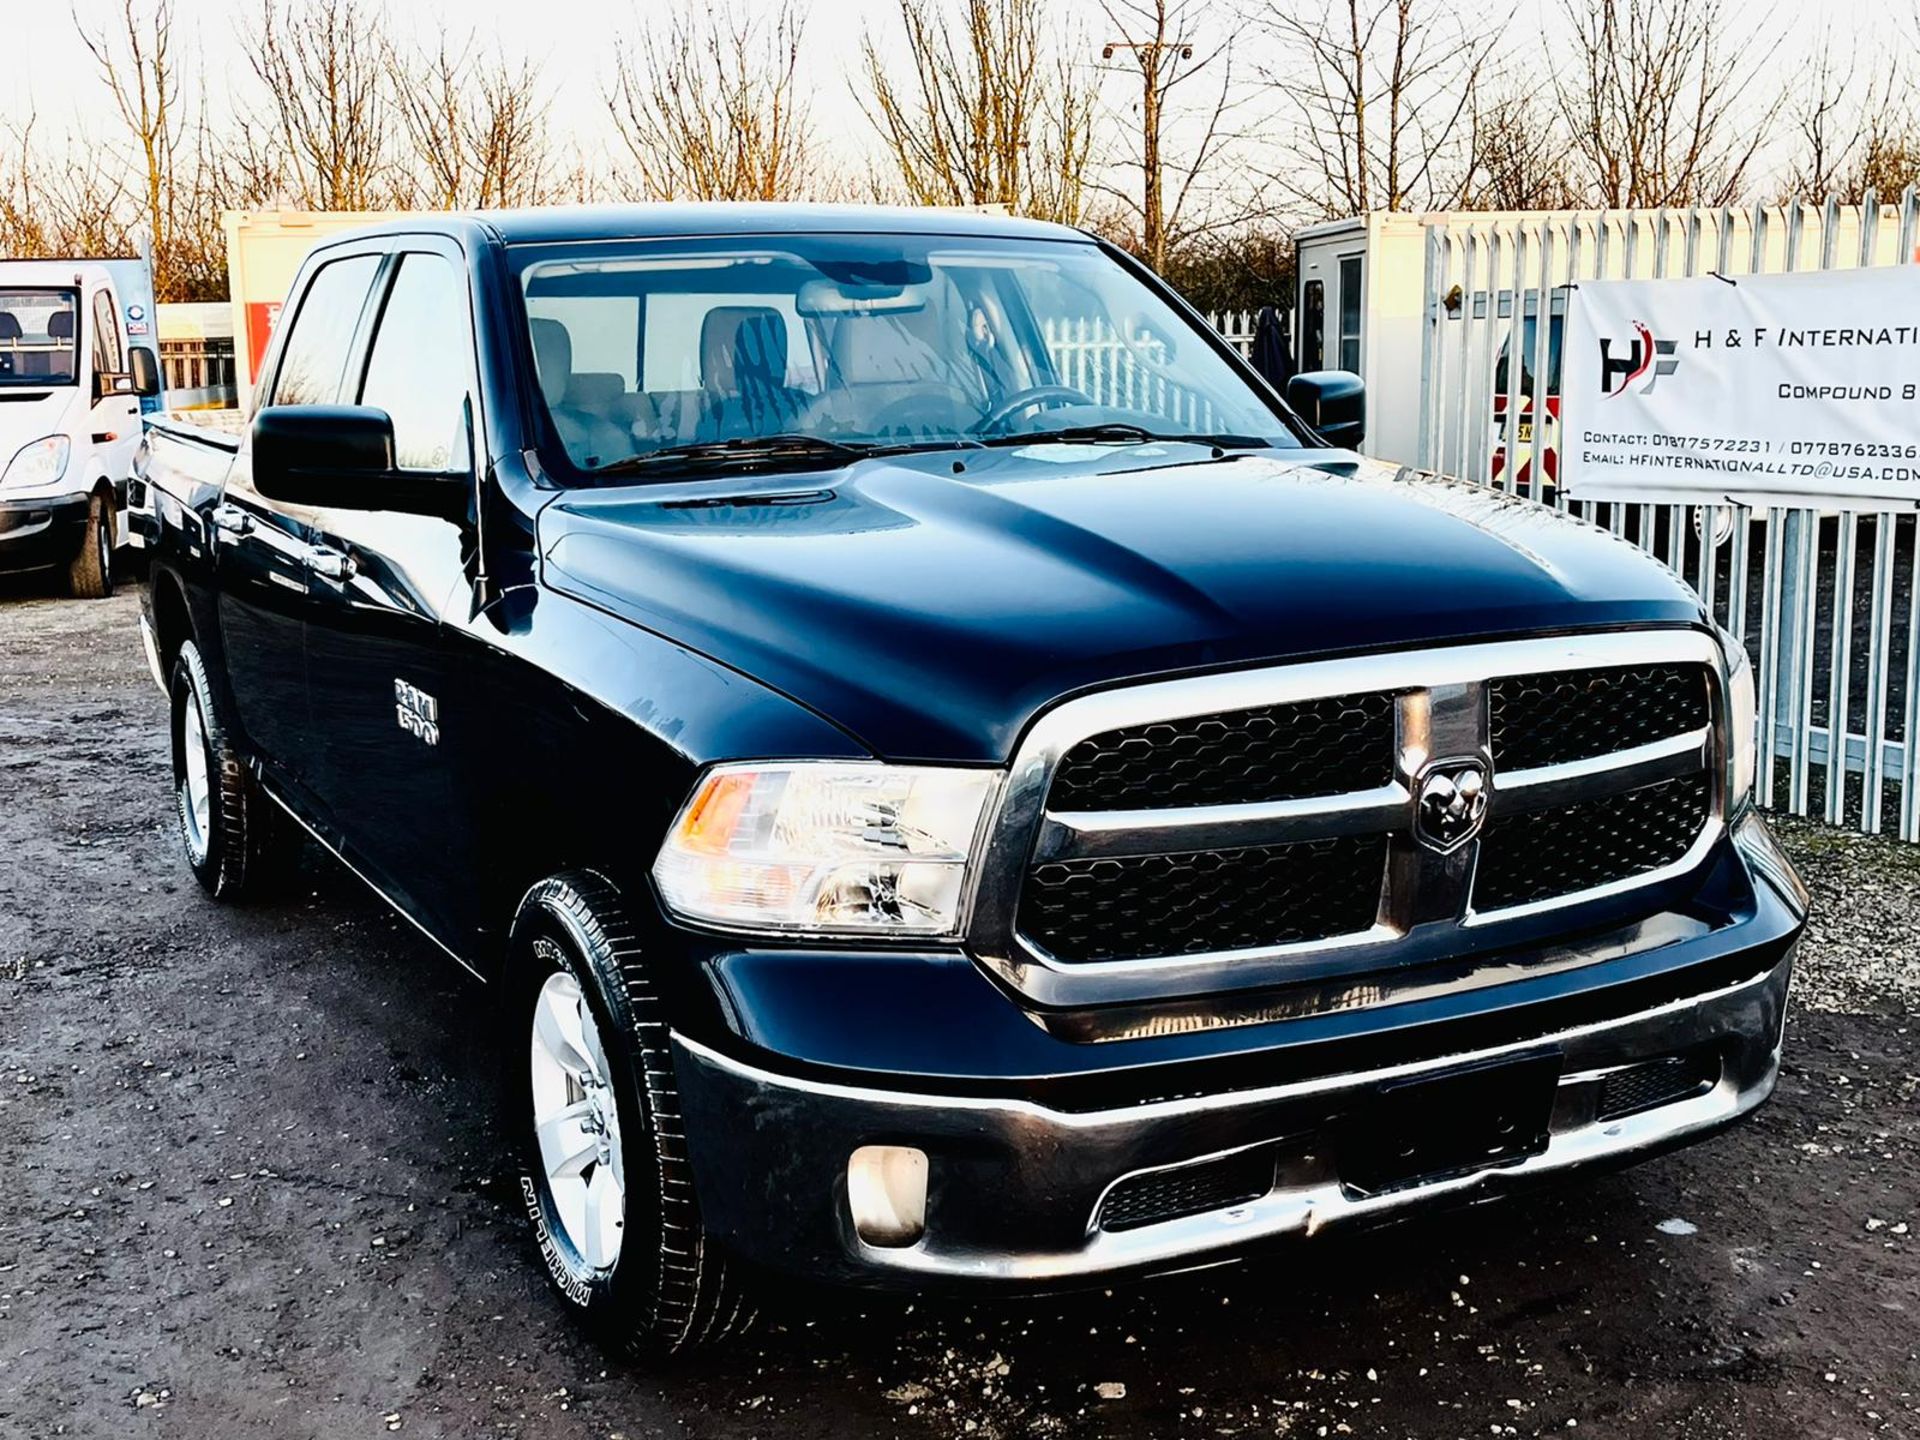 ** ON SALE ** Dodge Ram 3.6L V6 1500 Crew Cab SLT ' 2015 Year ' A/C - 6 Seats - Chrome Package - Image 5 of 31